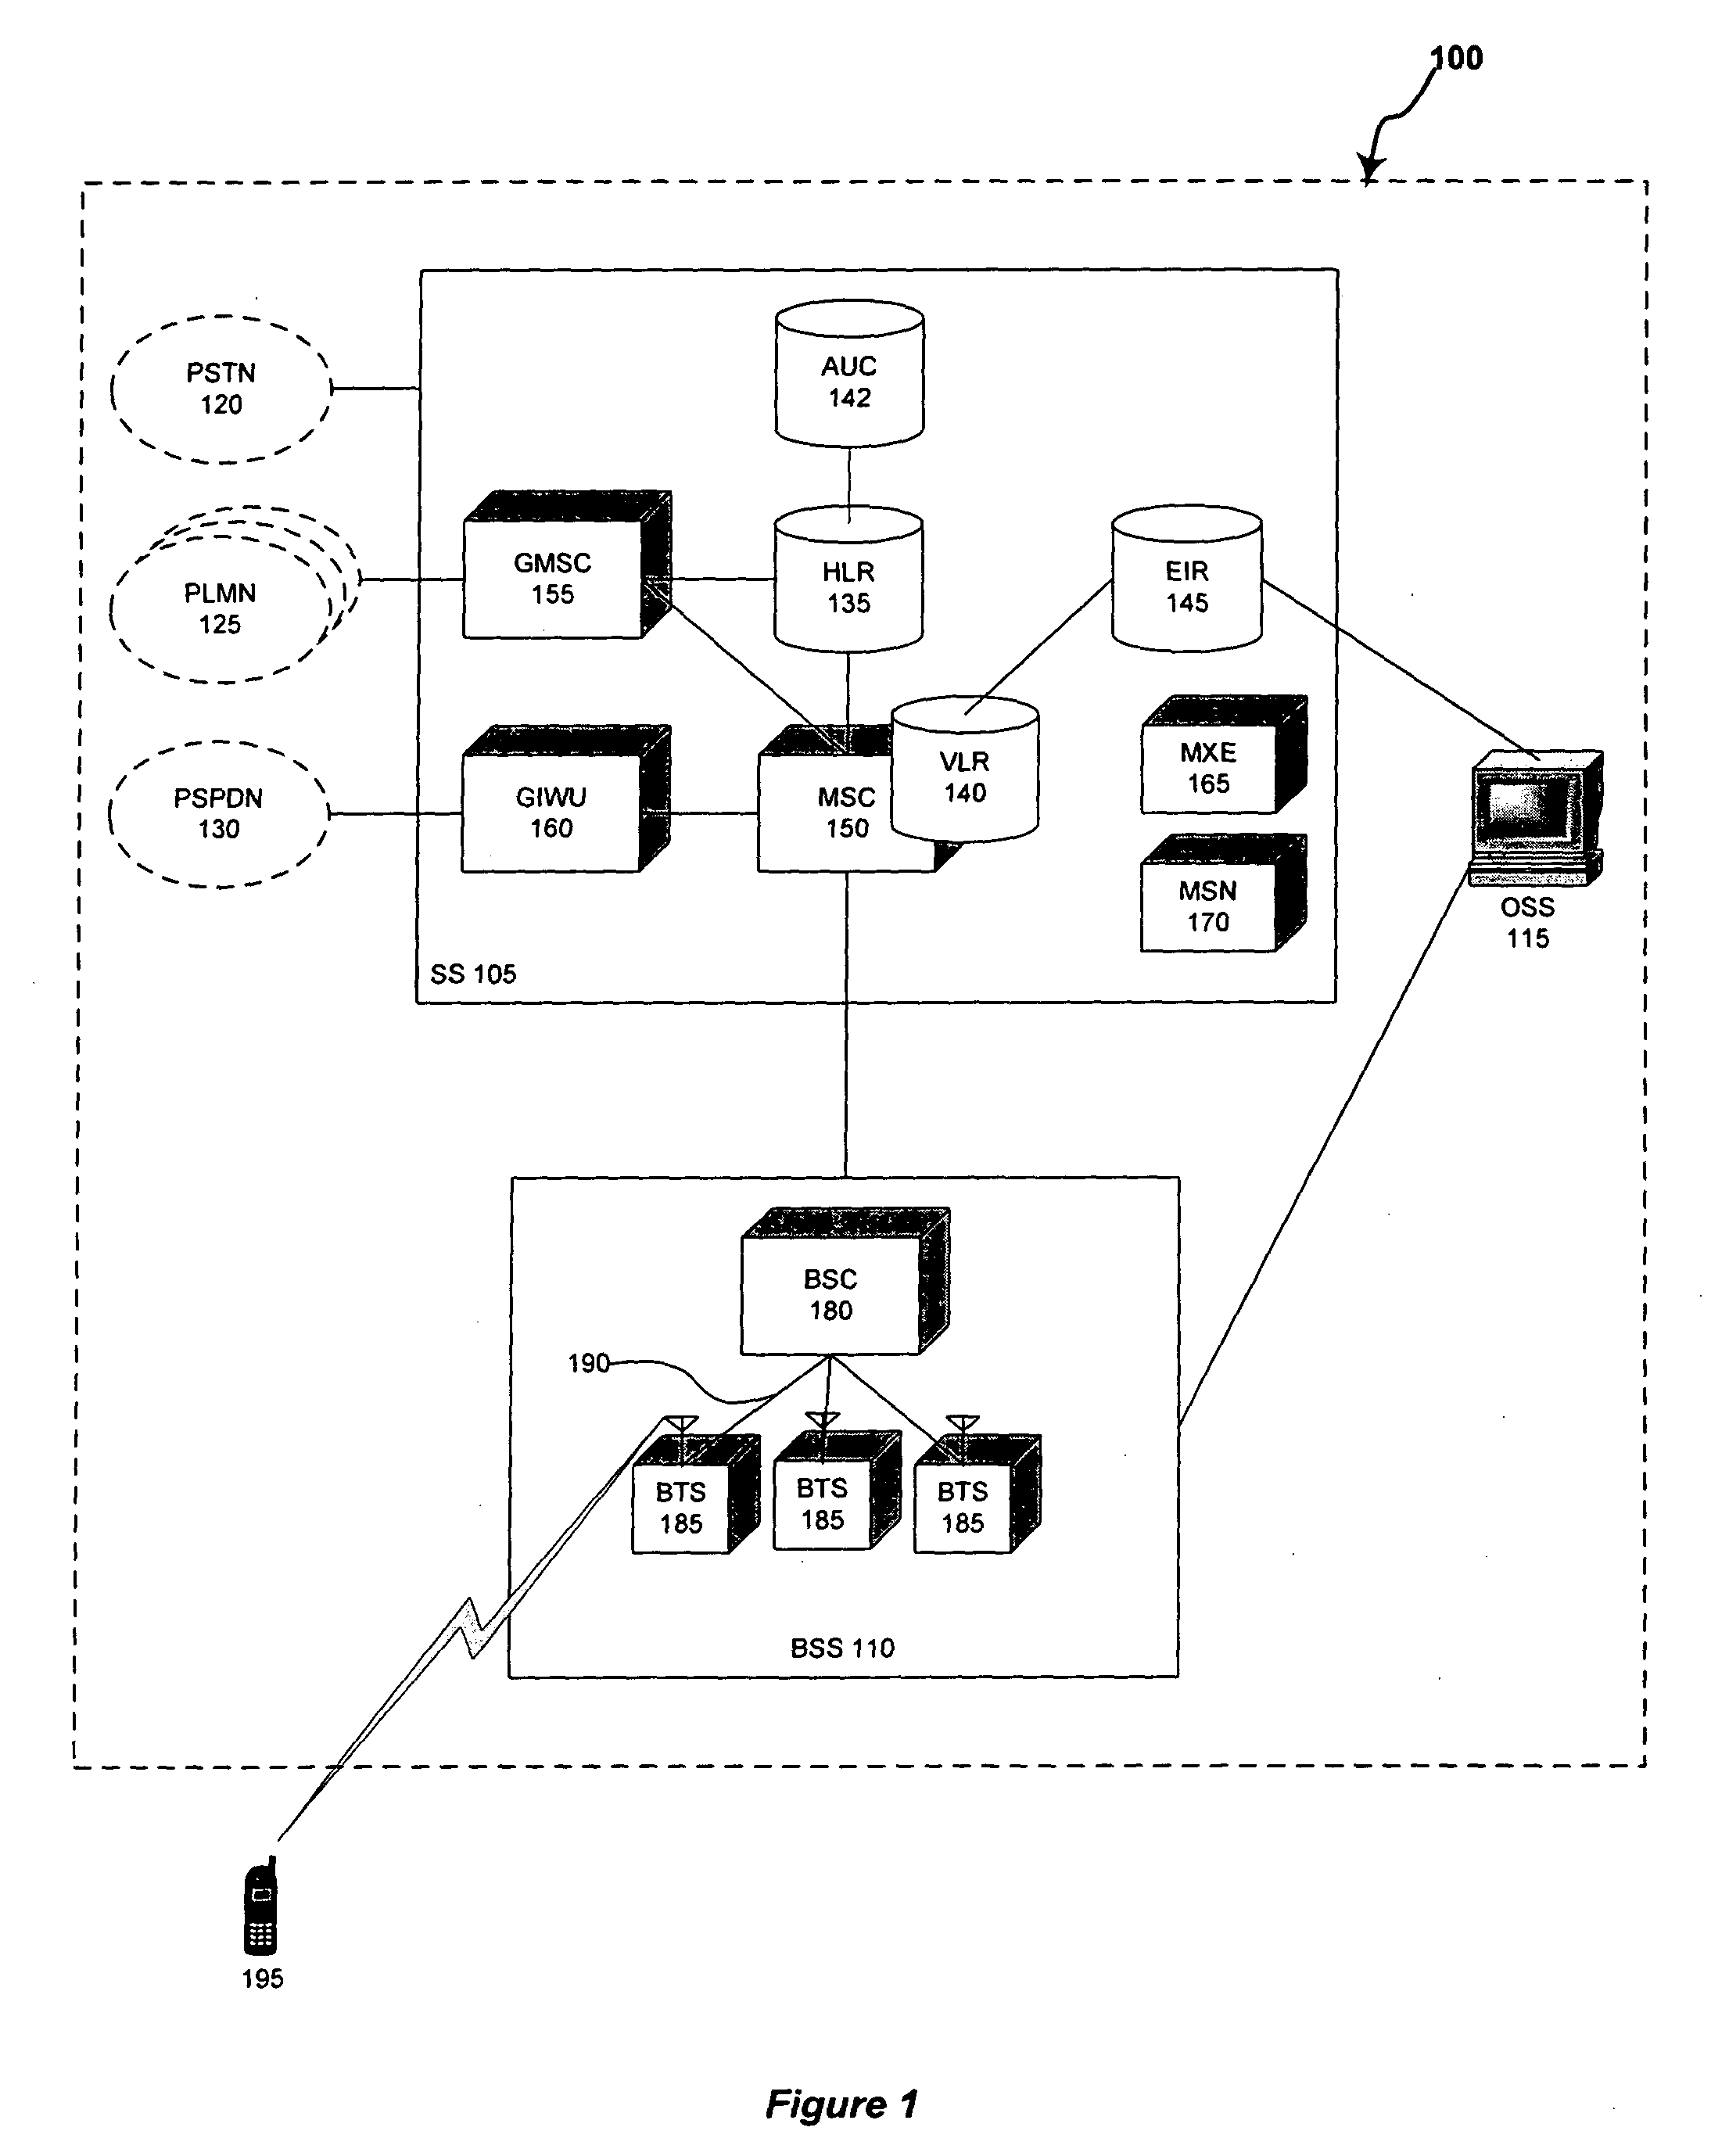 Systems and methods for automatic selection of an optimal available data bearer